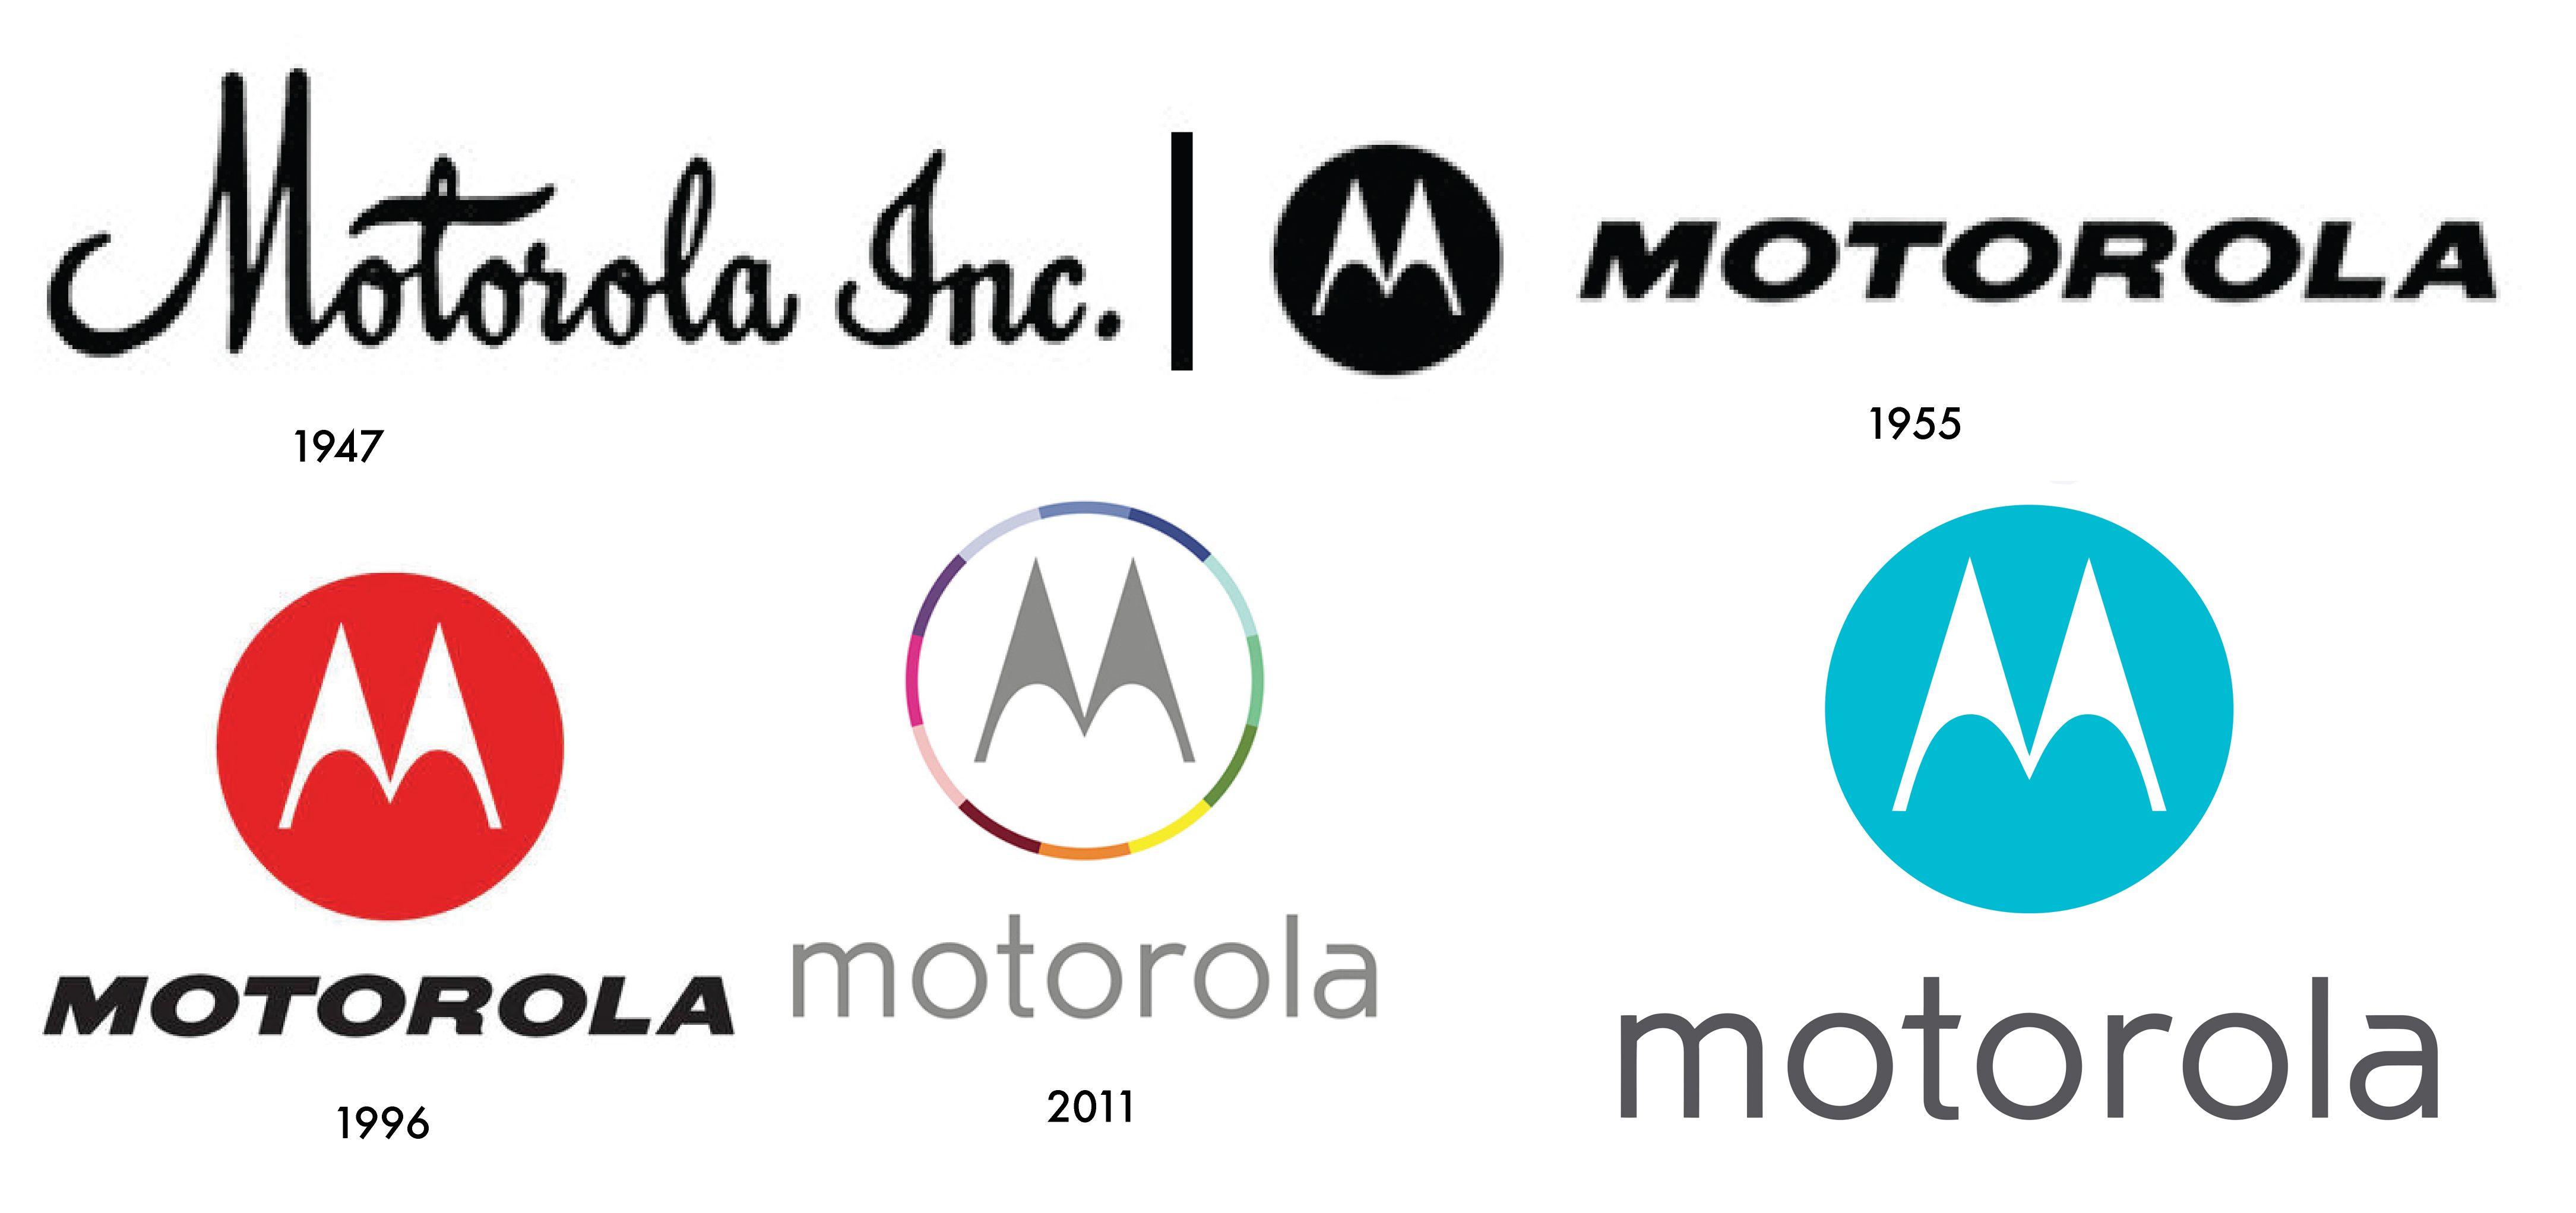 Old Motorola Logo - Motorola Logo, Motorola Symbol, History and Evolution